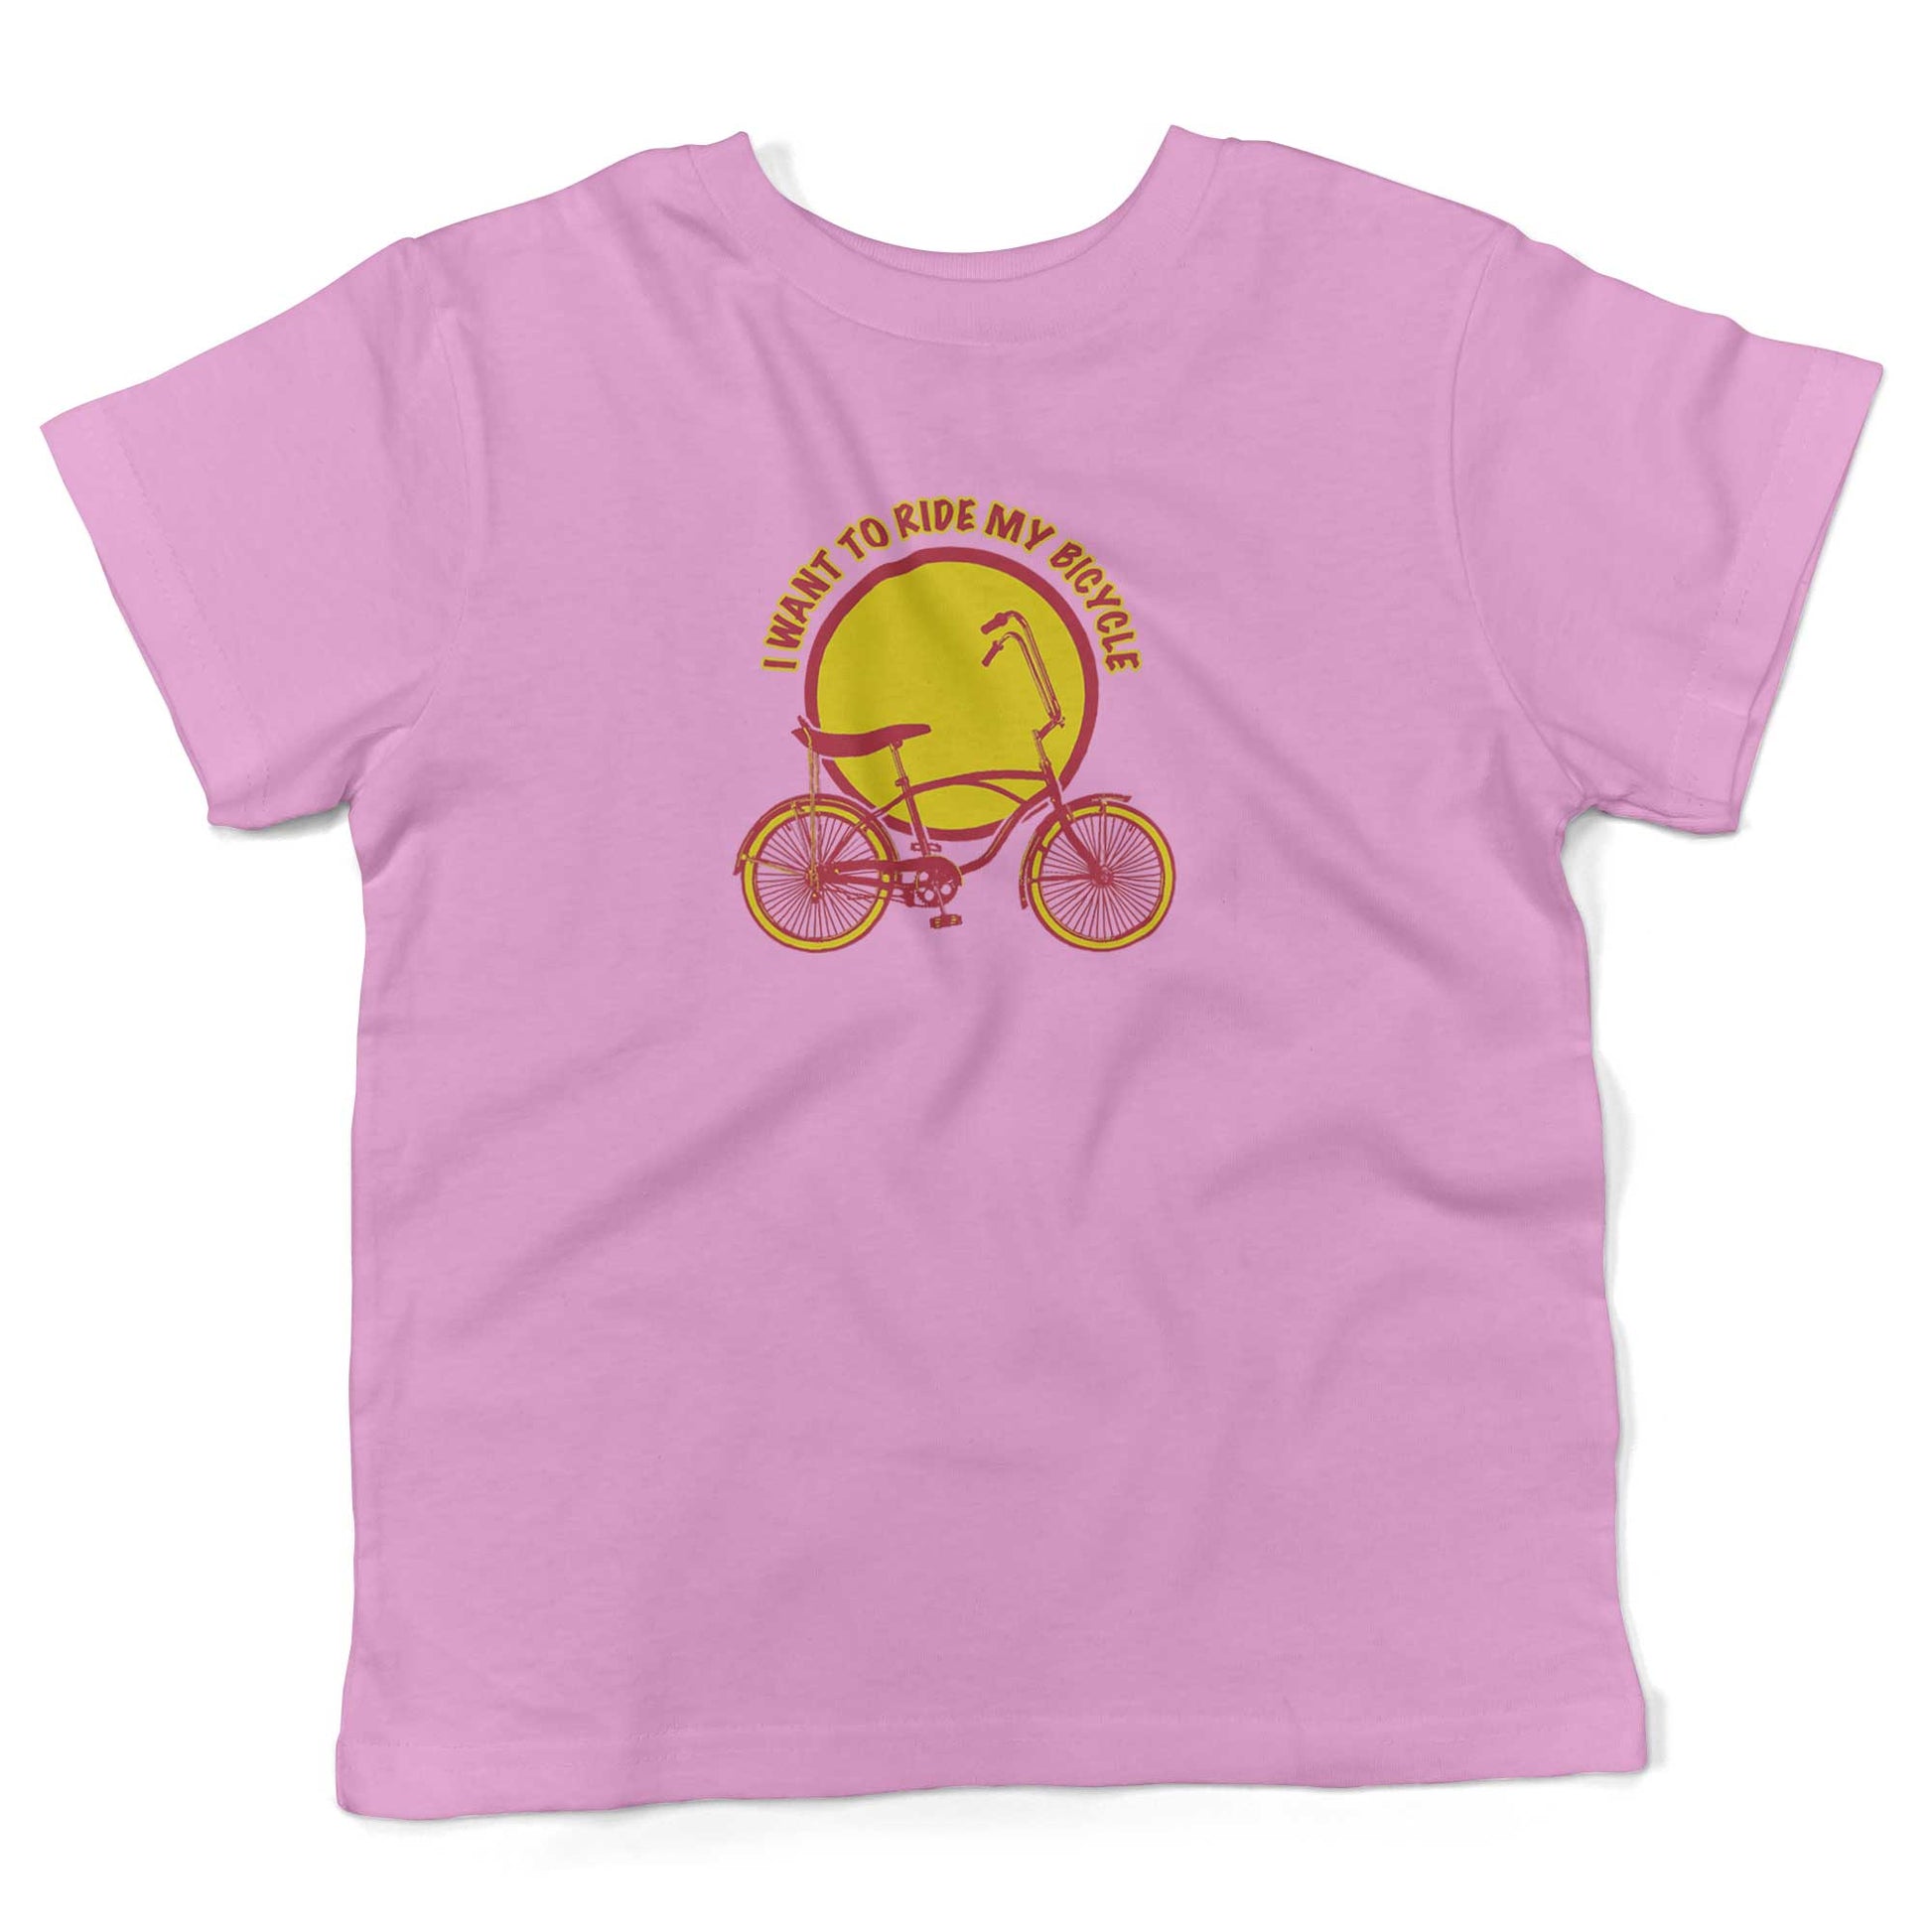 I Want To Ride My Bicycle Toddler Shirt-Organic Pink-2T